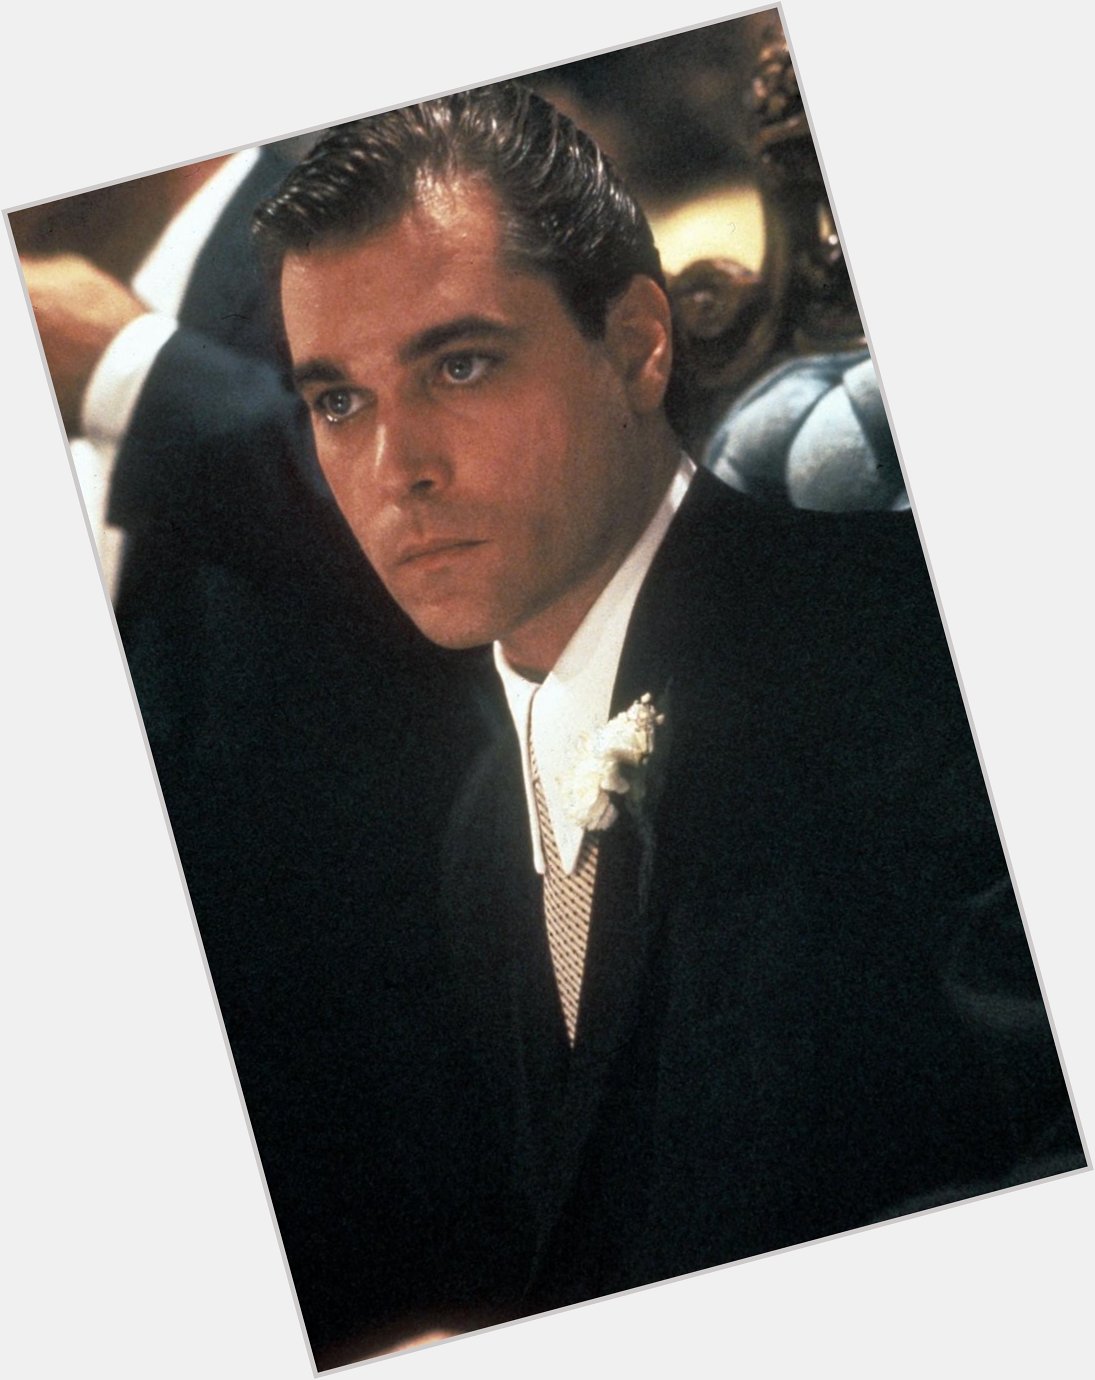 Happy heavenly birthday ray Liotta( one day late) what s your favorite liotta movie?? 